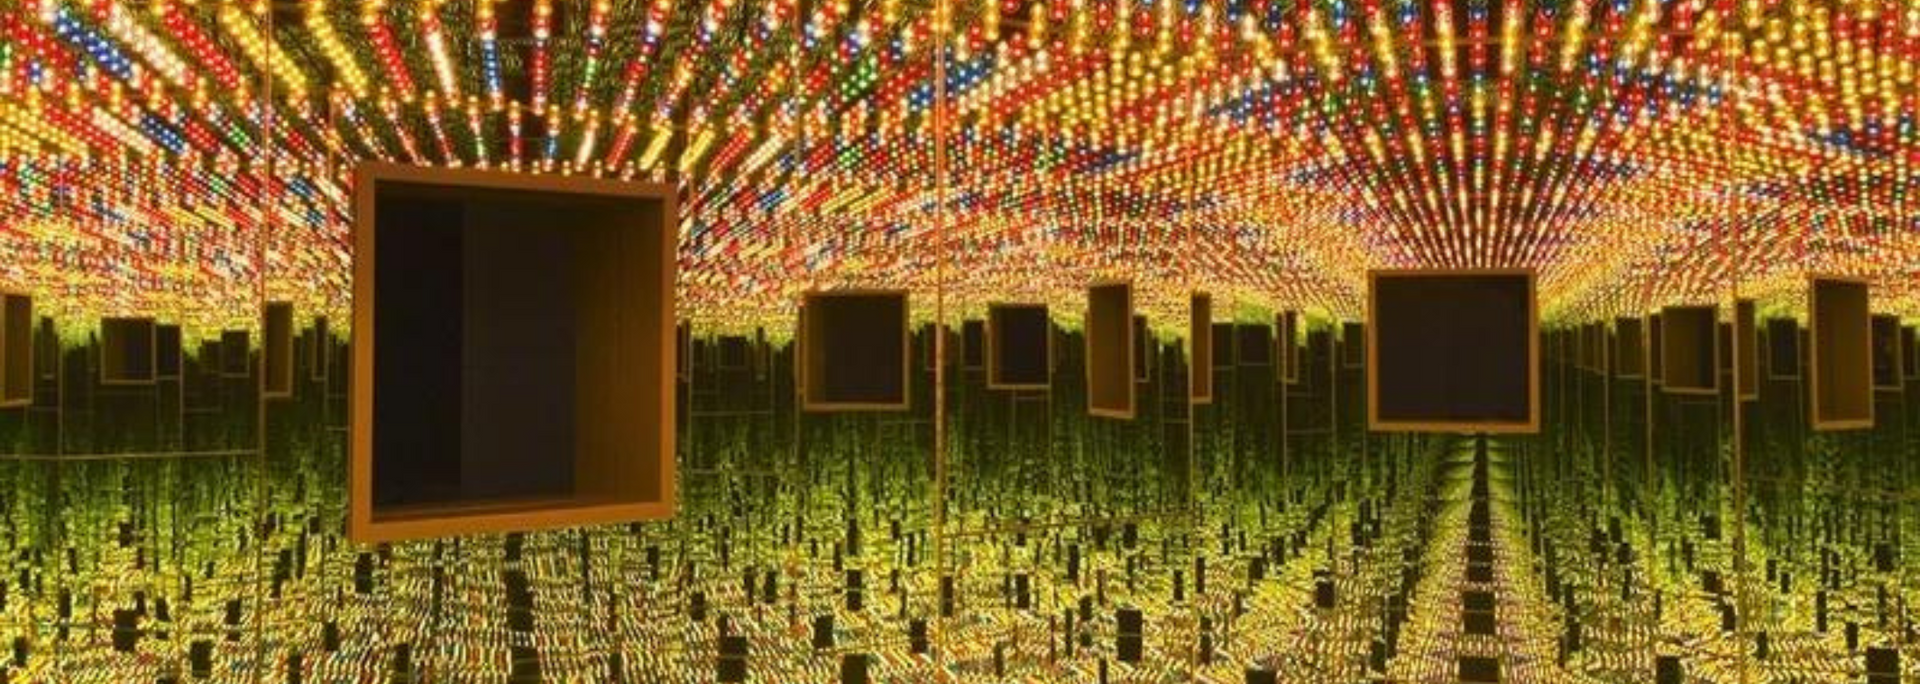 Picture of Yayoi Kusama's Infinity Mirror Rooms.